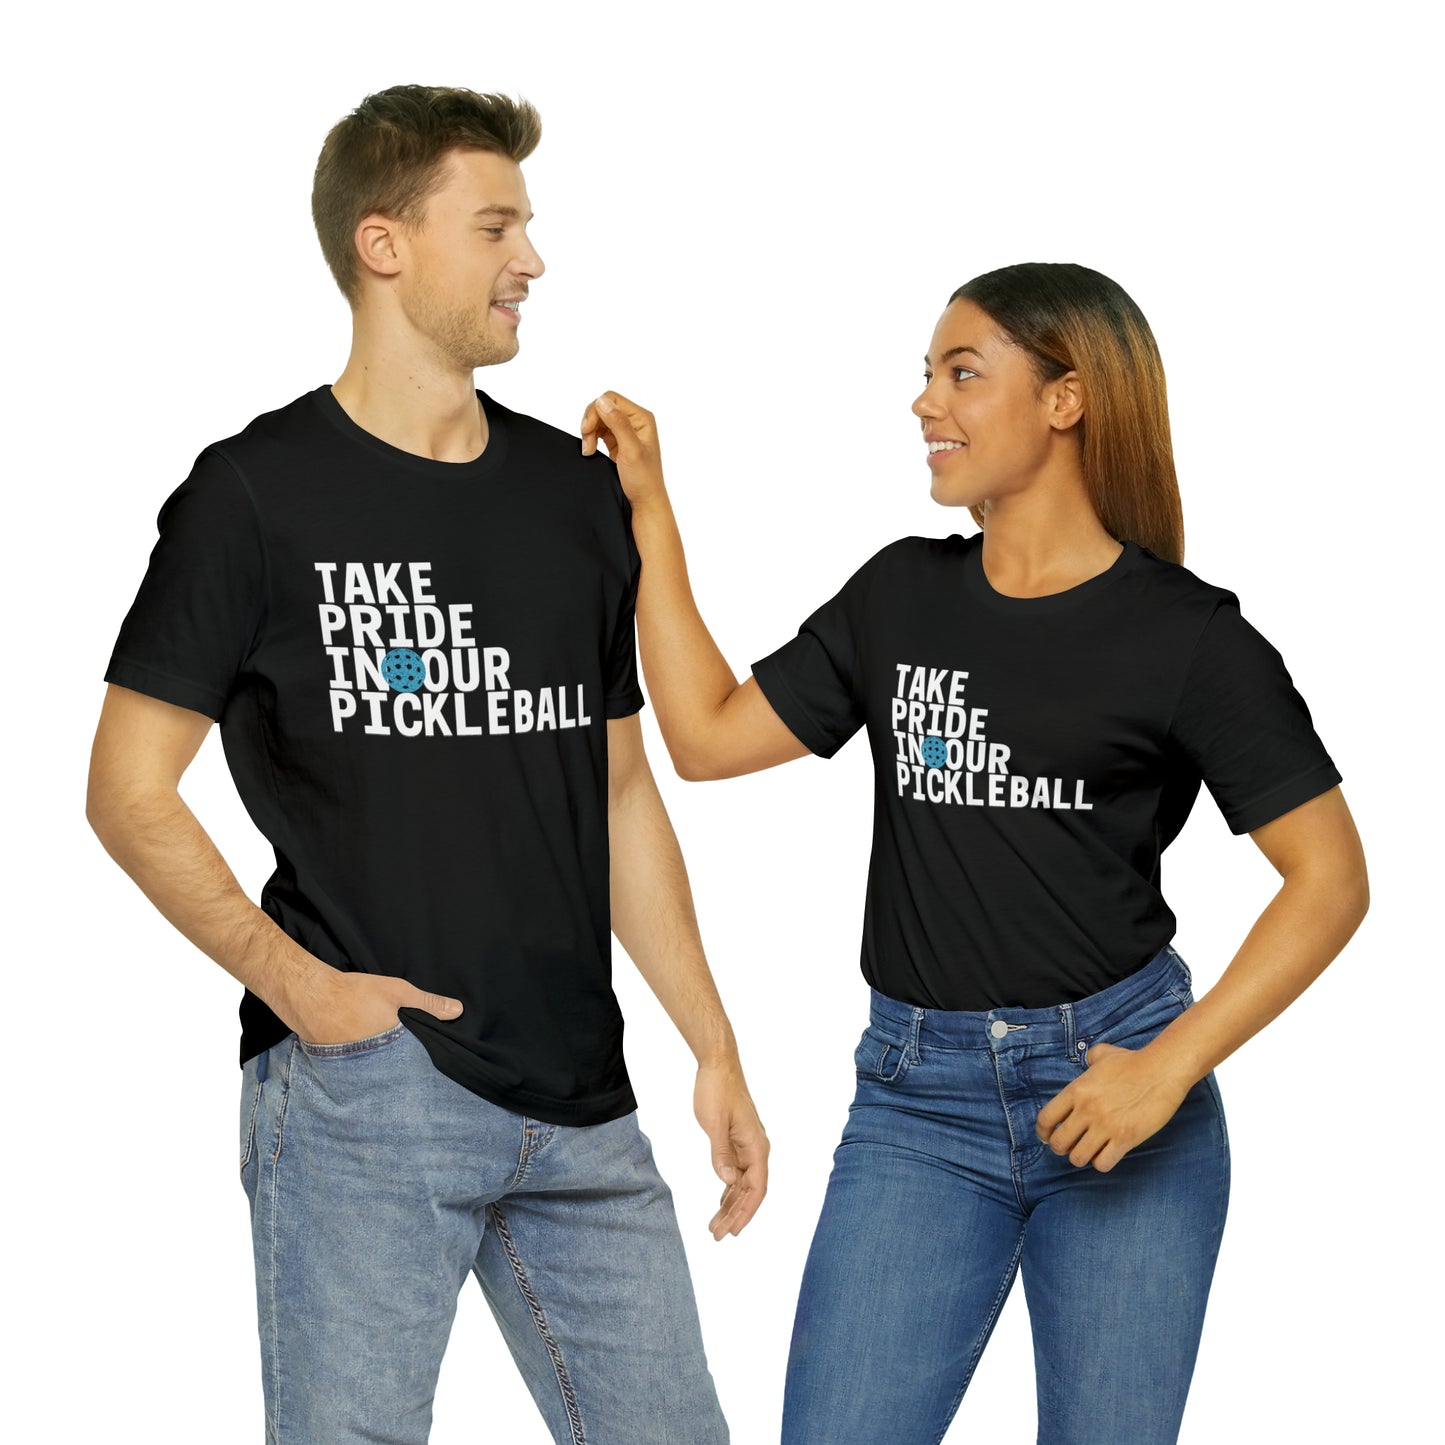 Take Pride in Our Pickleball - Classic T-Shirt